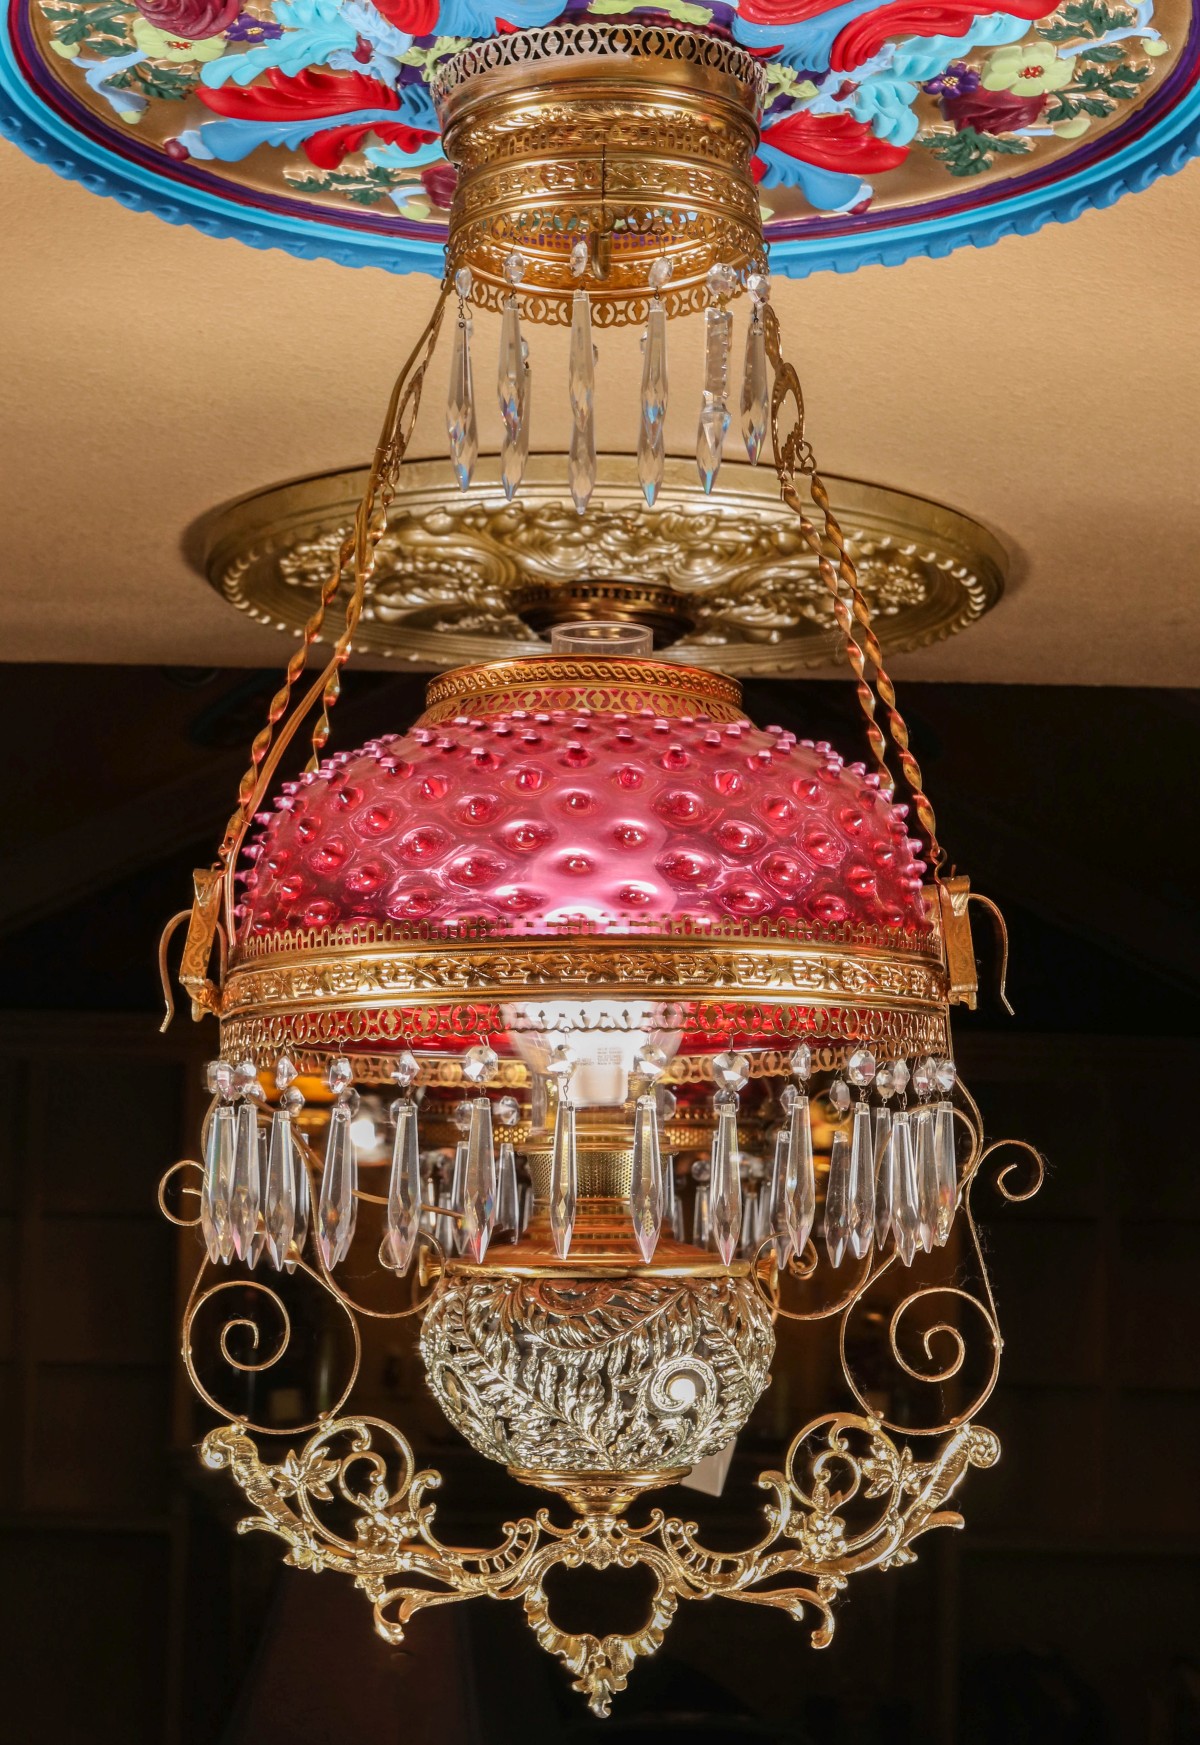 A HANGING LIBRARY LAMP WITH ORNATE 2f5ca1